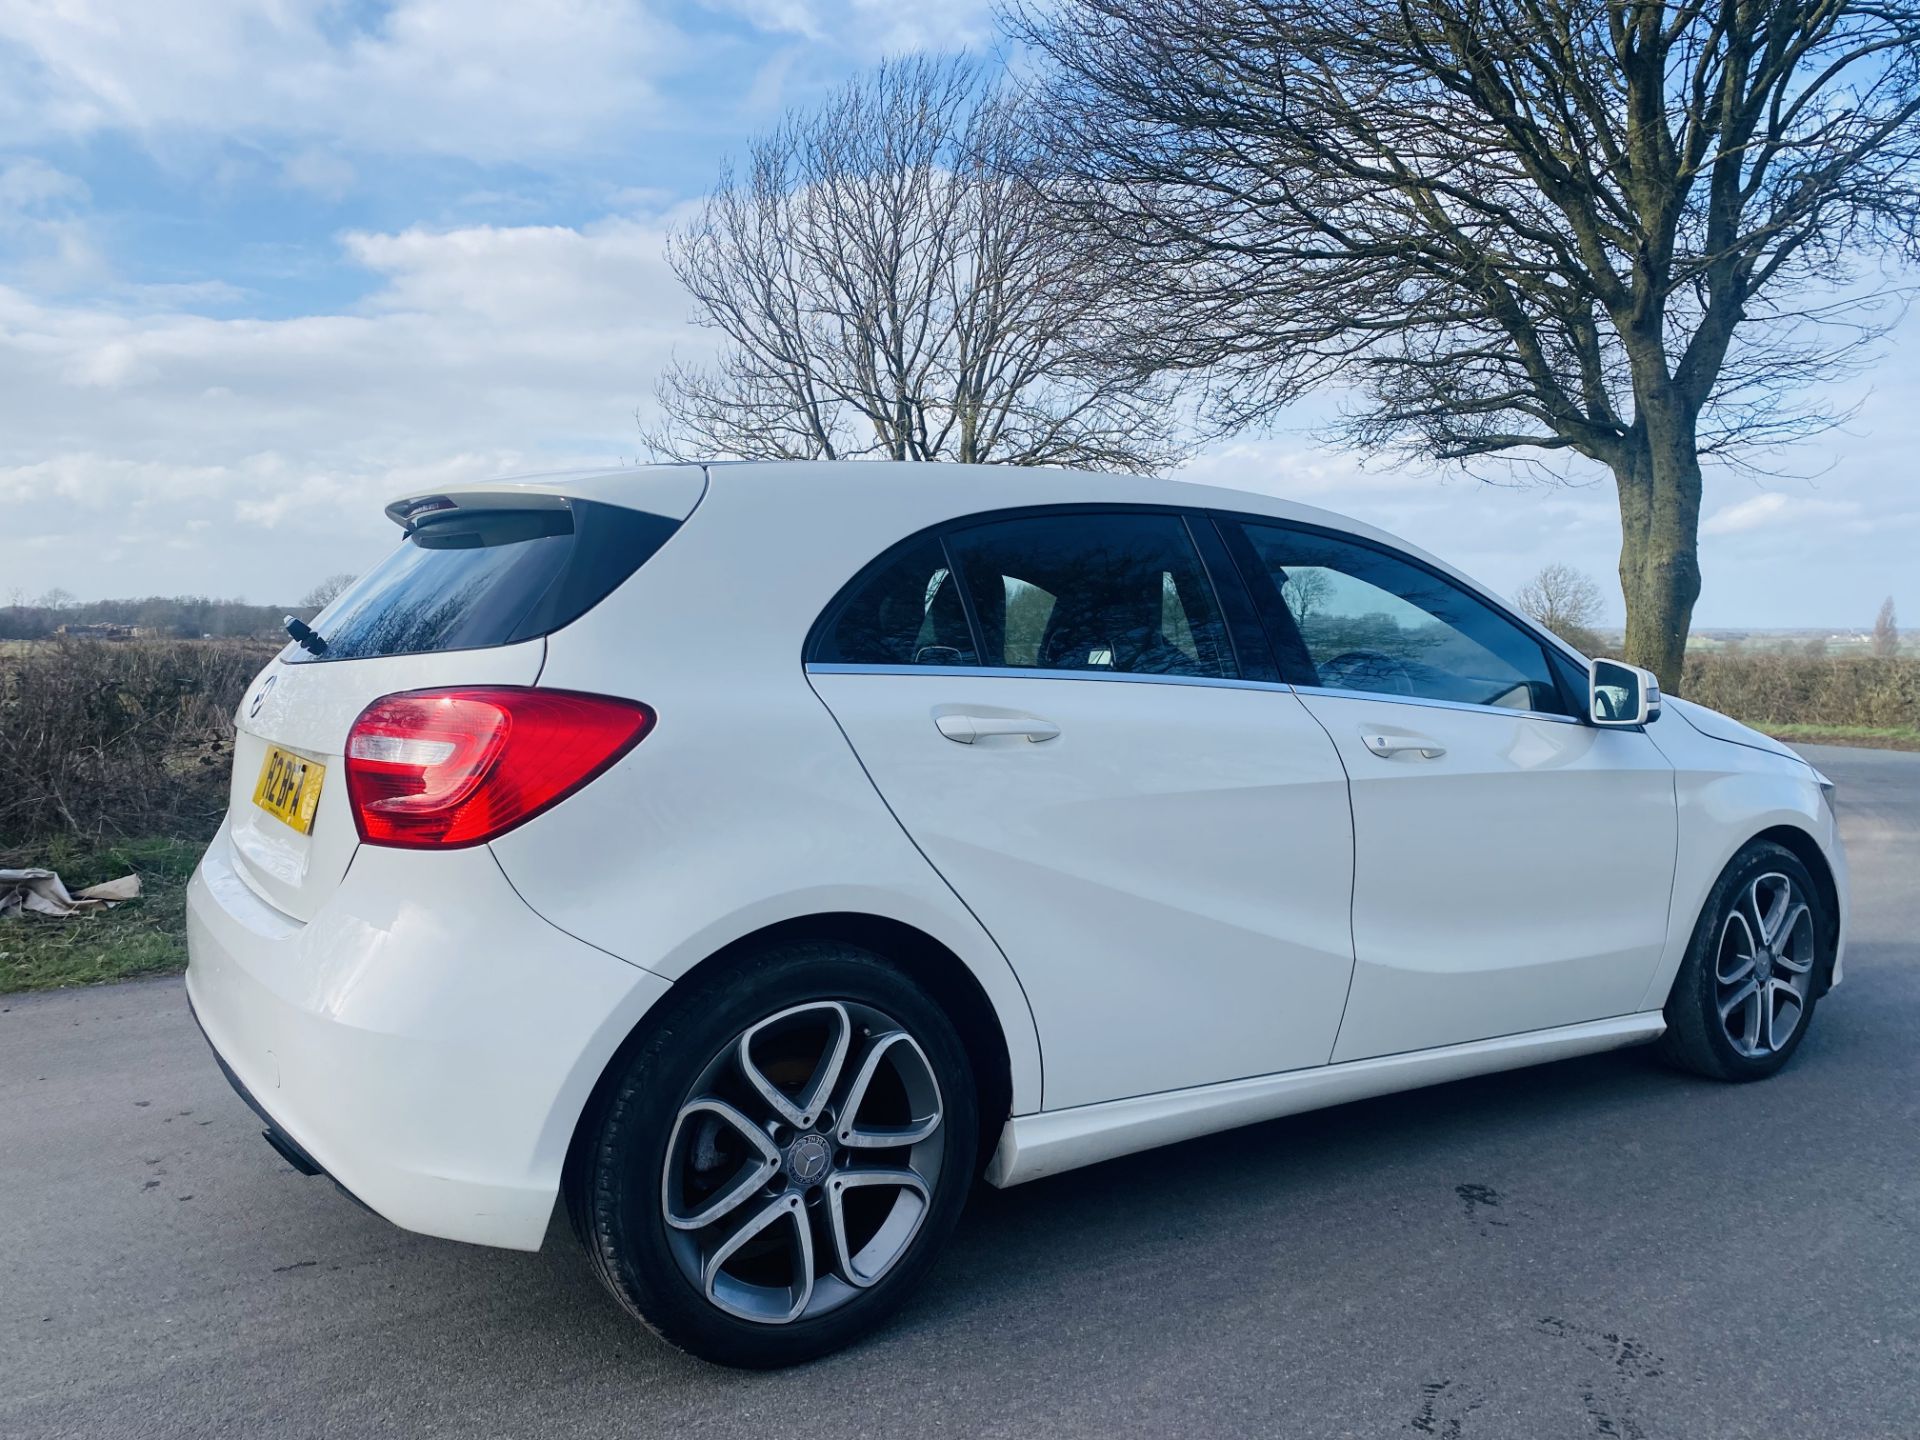 (ON SALE) MERCEDES A180d "SPORT" (13 REG) PRIVATE PLATE INCLUDED - AIR CON - ALLOYS (NO VAT) - Image 8 of 22